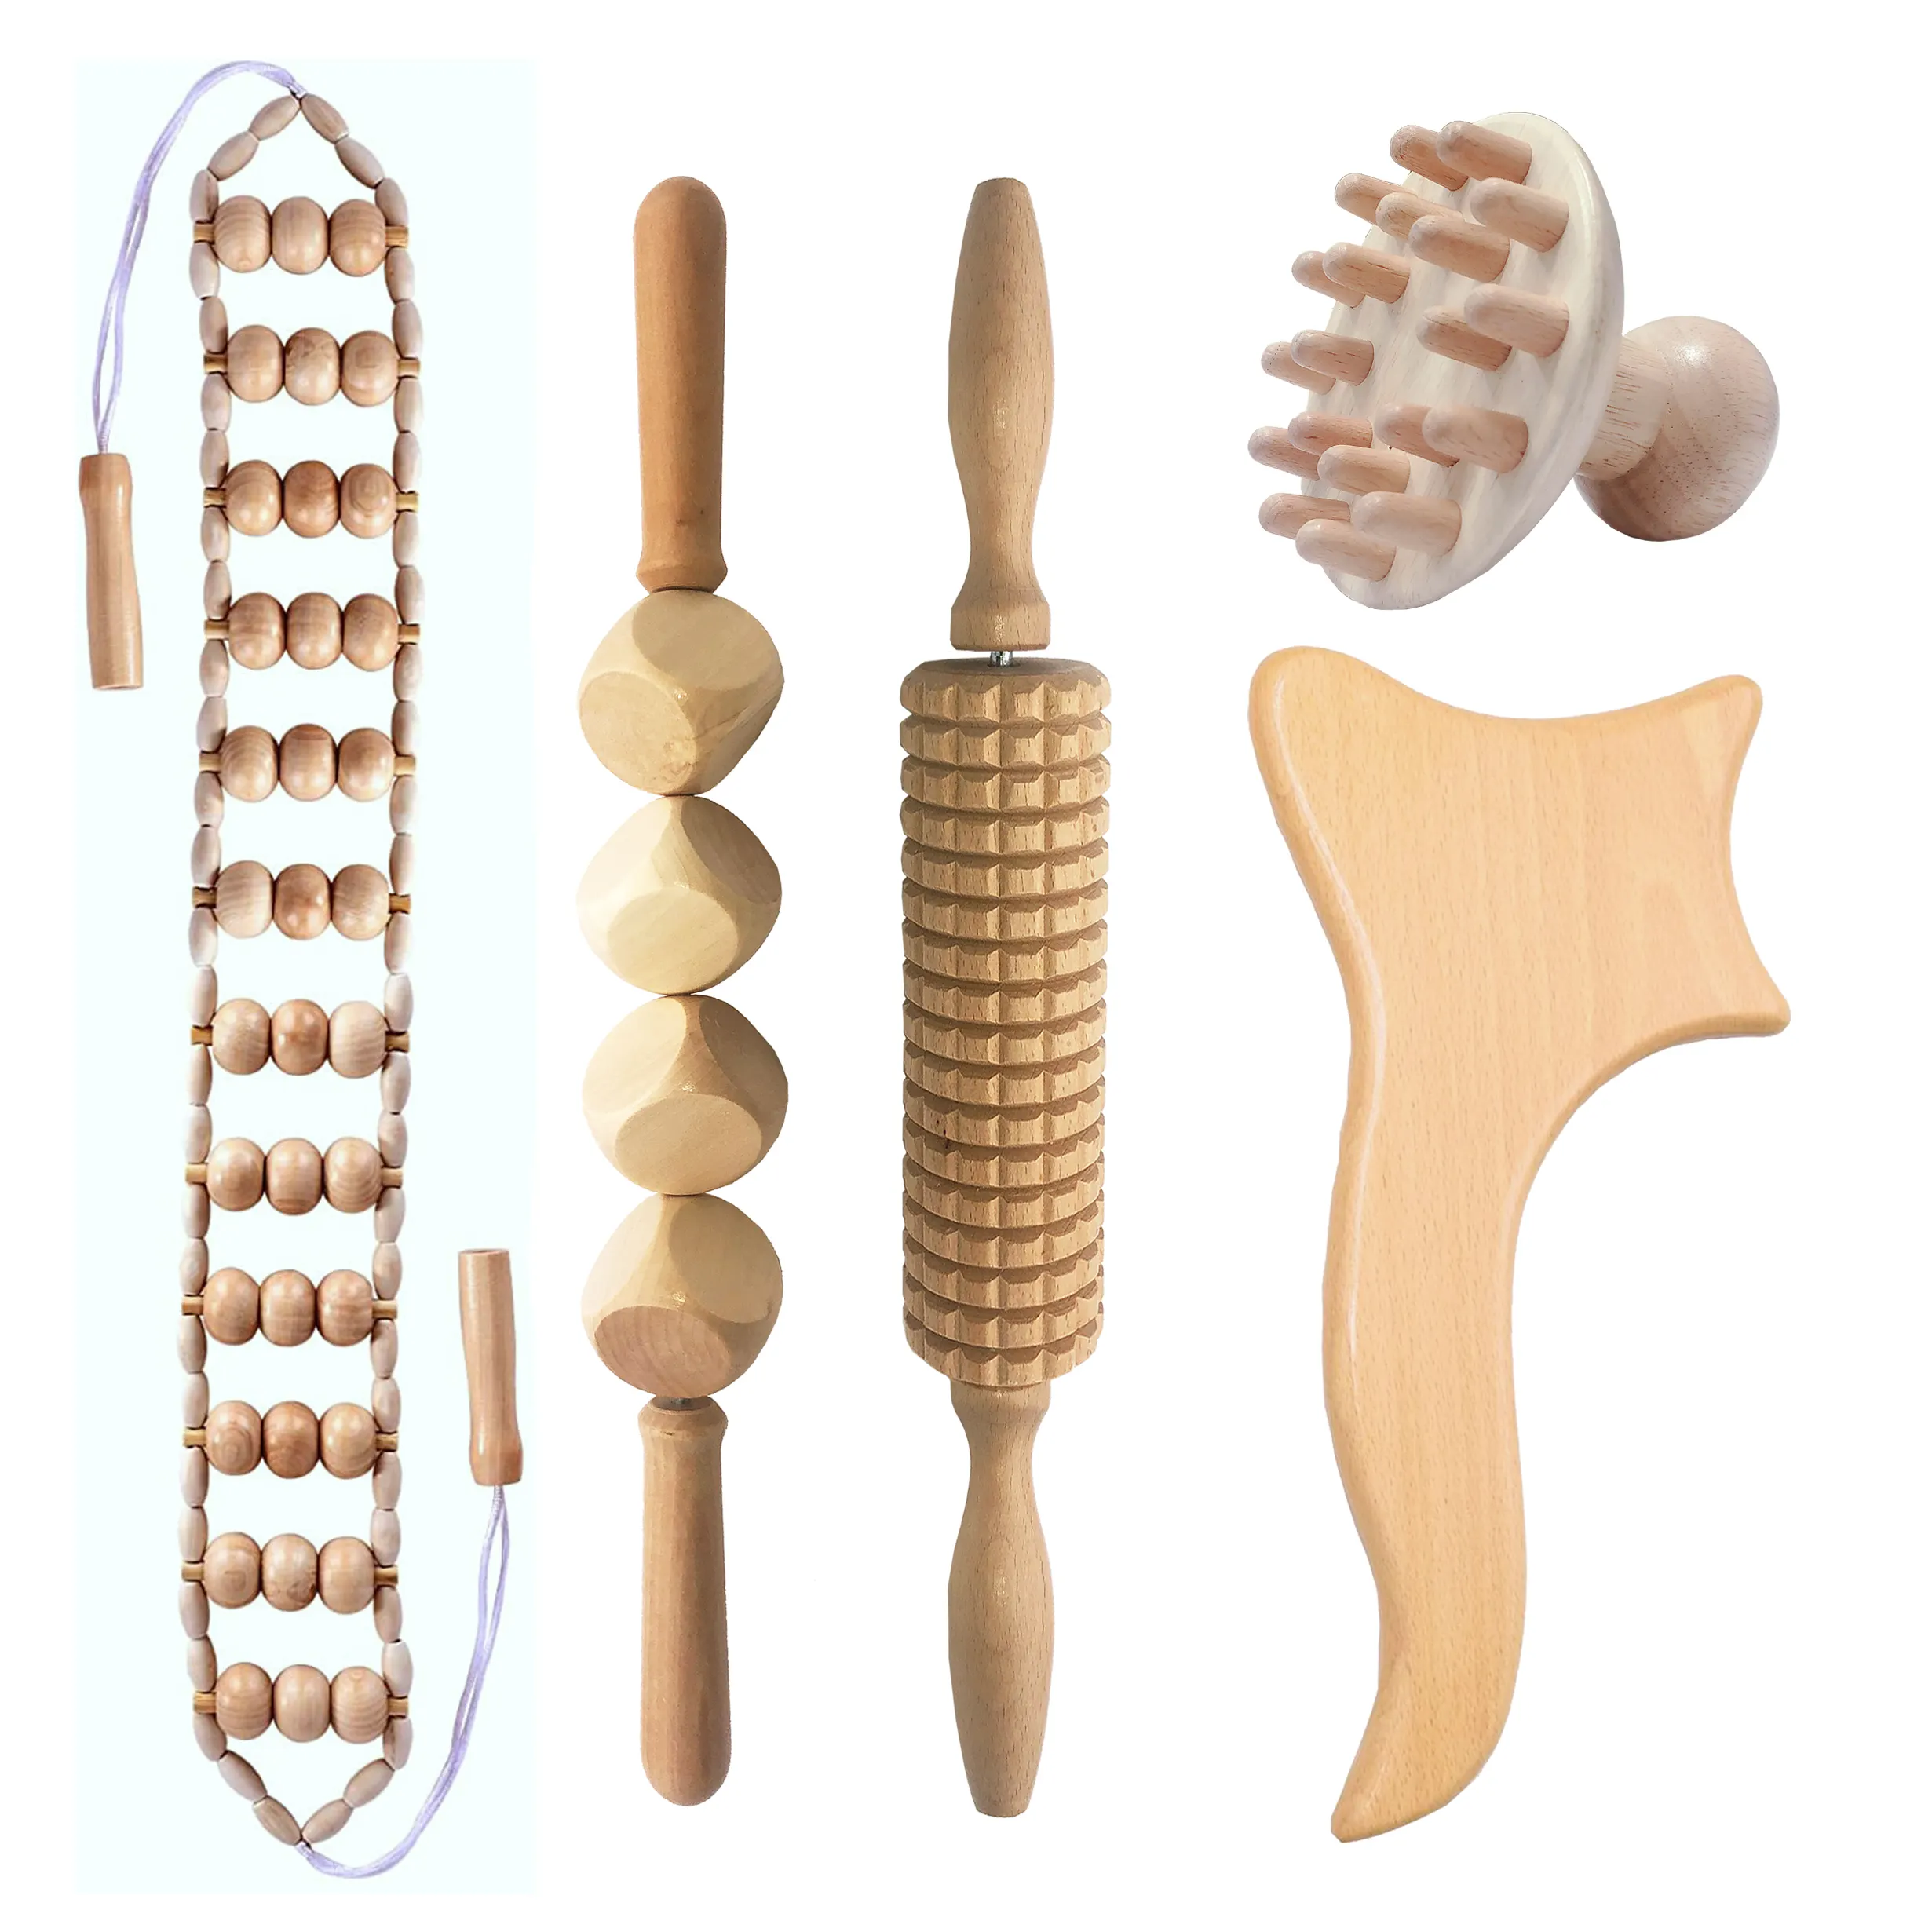 Wooden Handheld Massage Body slimming Wooden Cup Therapy Cellulite Manual Muscle Release Massage